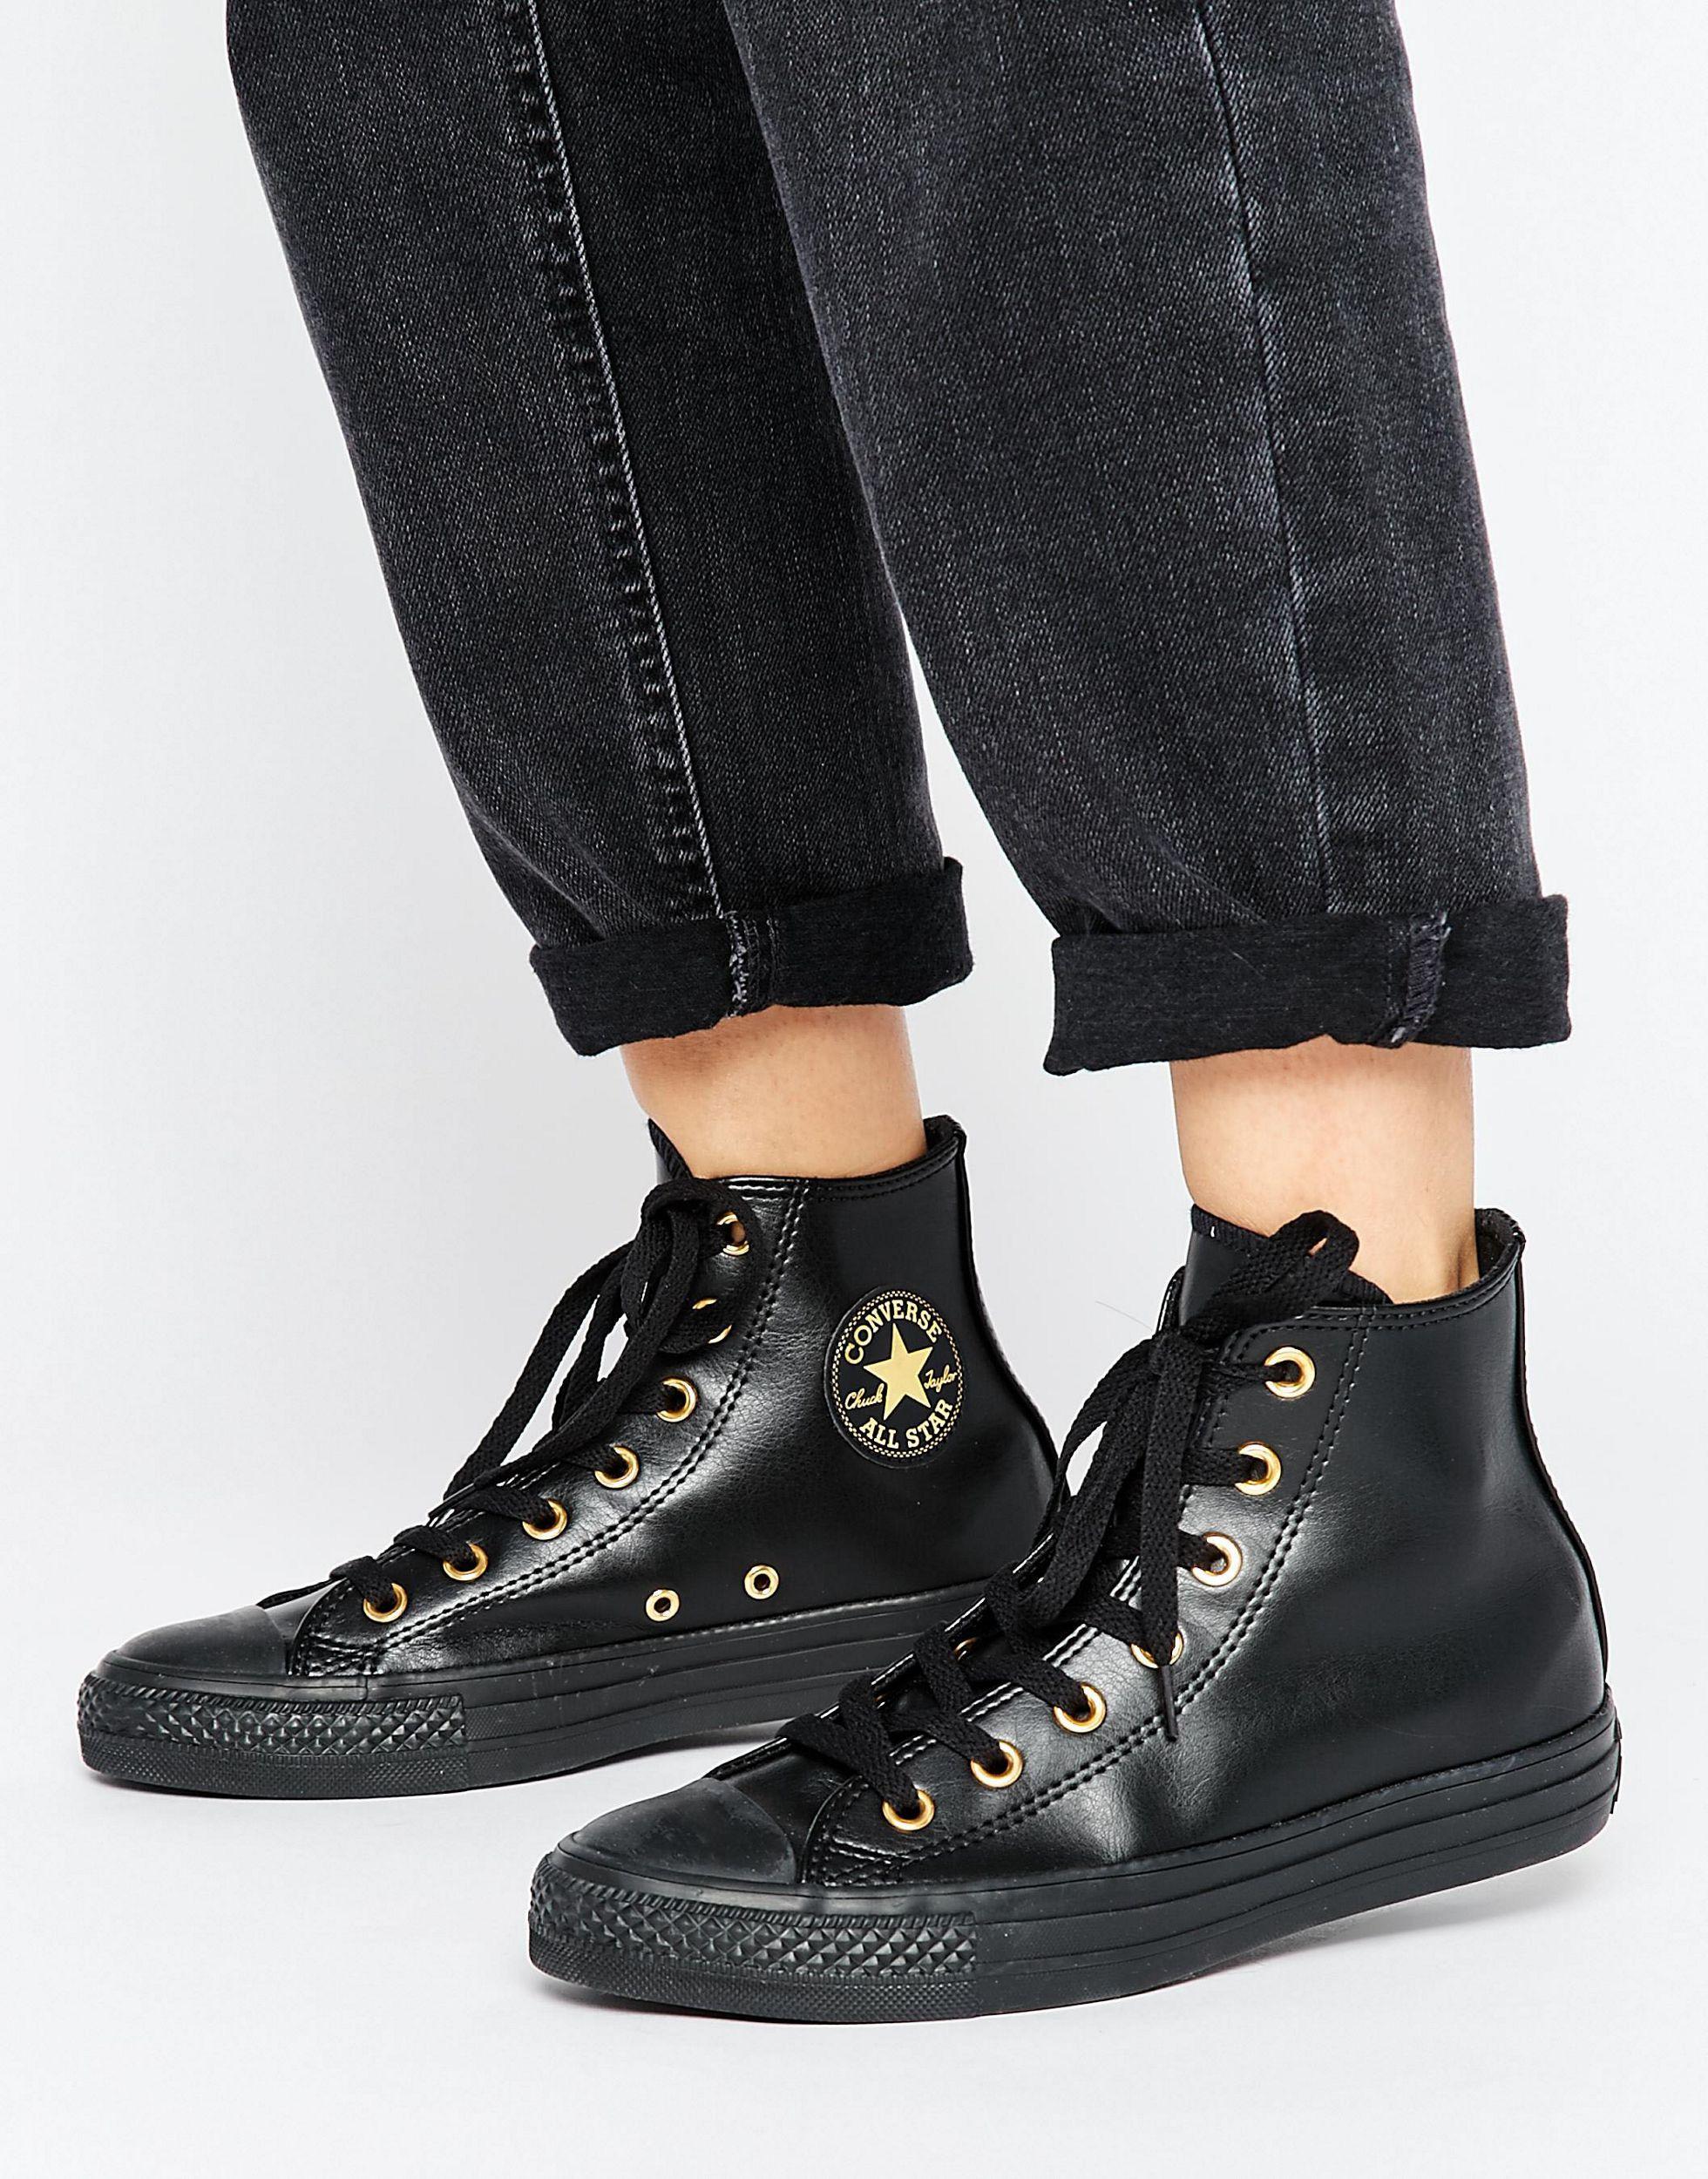 Converse Chuck Taylor Hi Top Sneakers In Black Gold Eyelets | Lyst